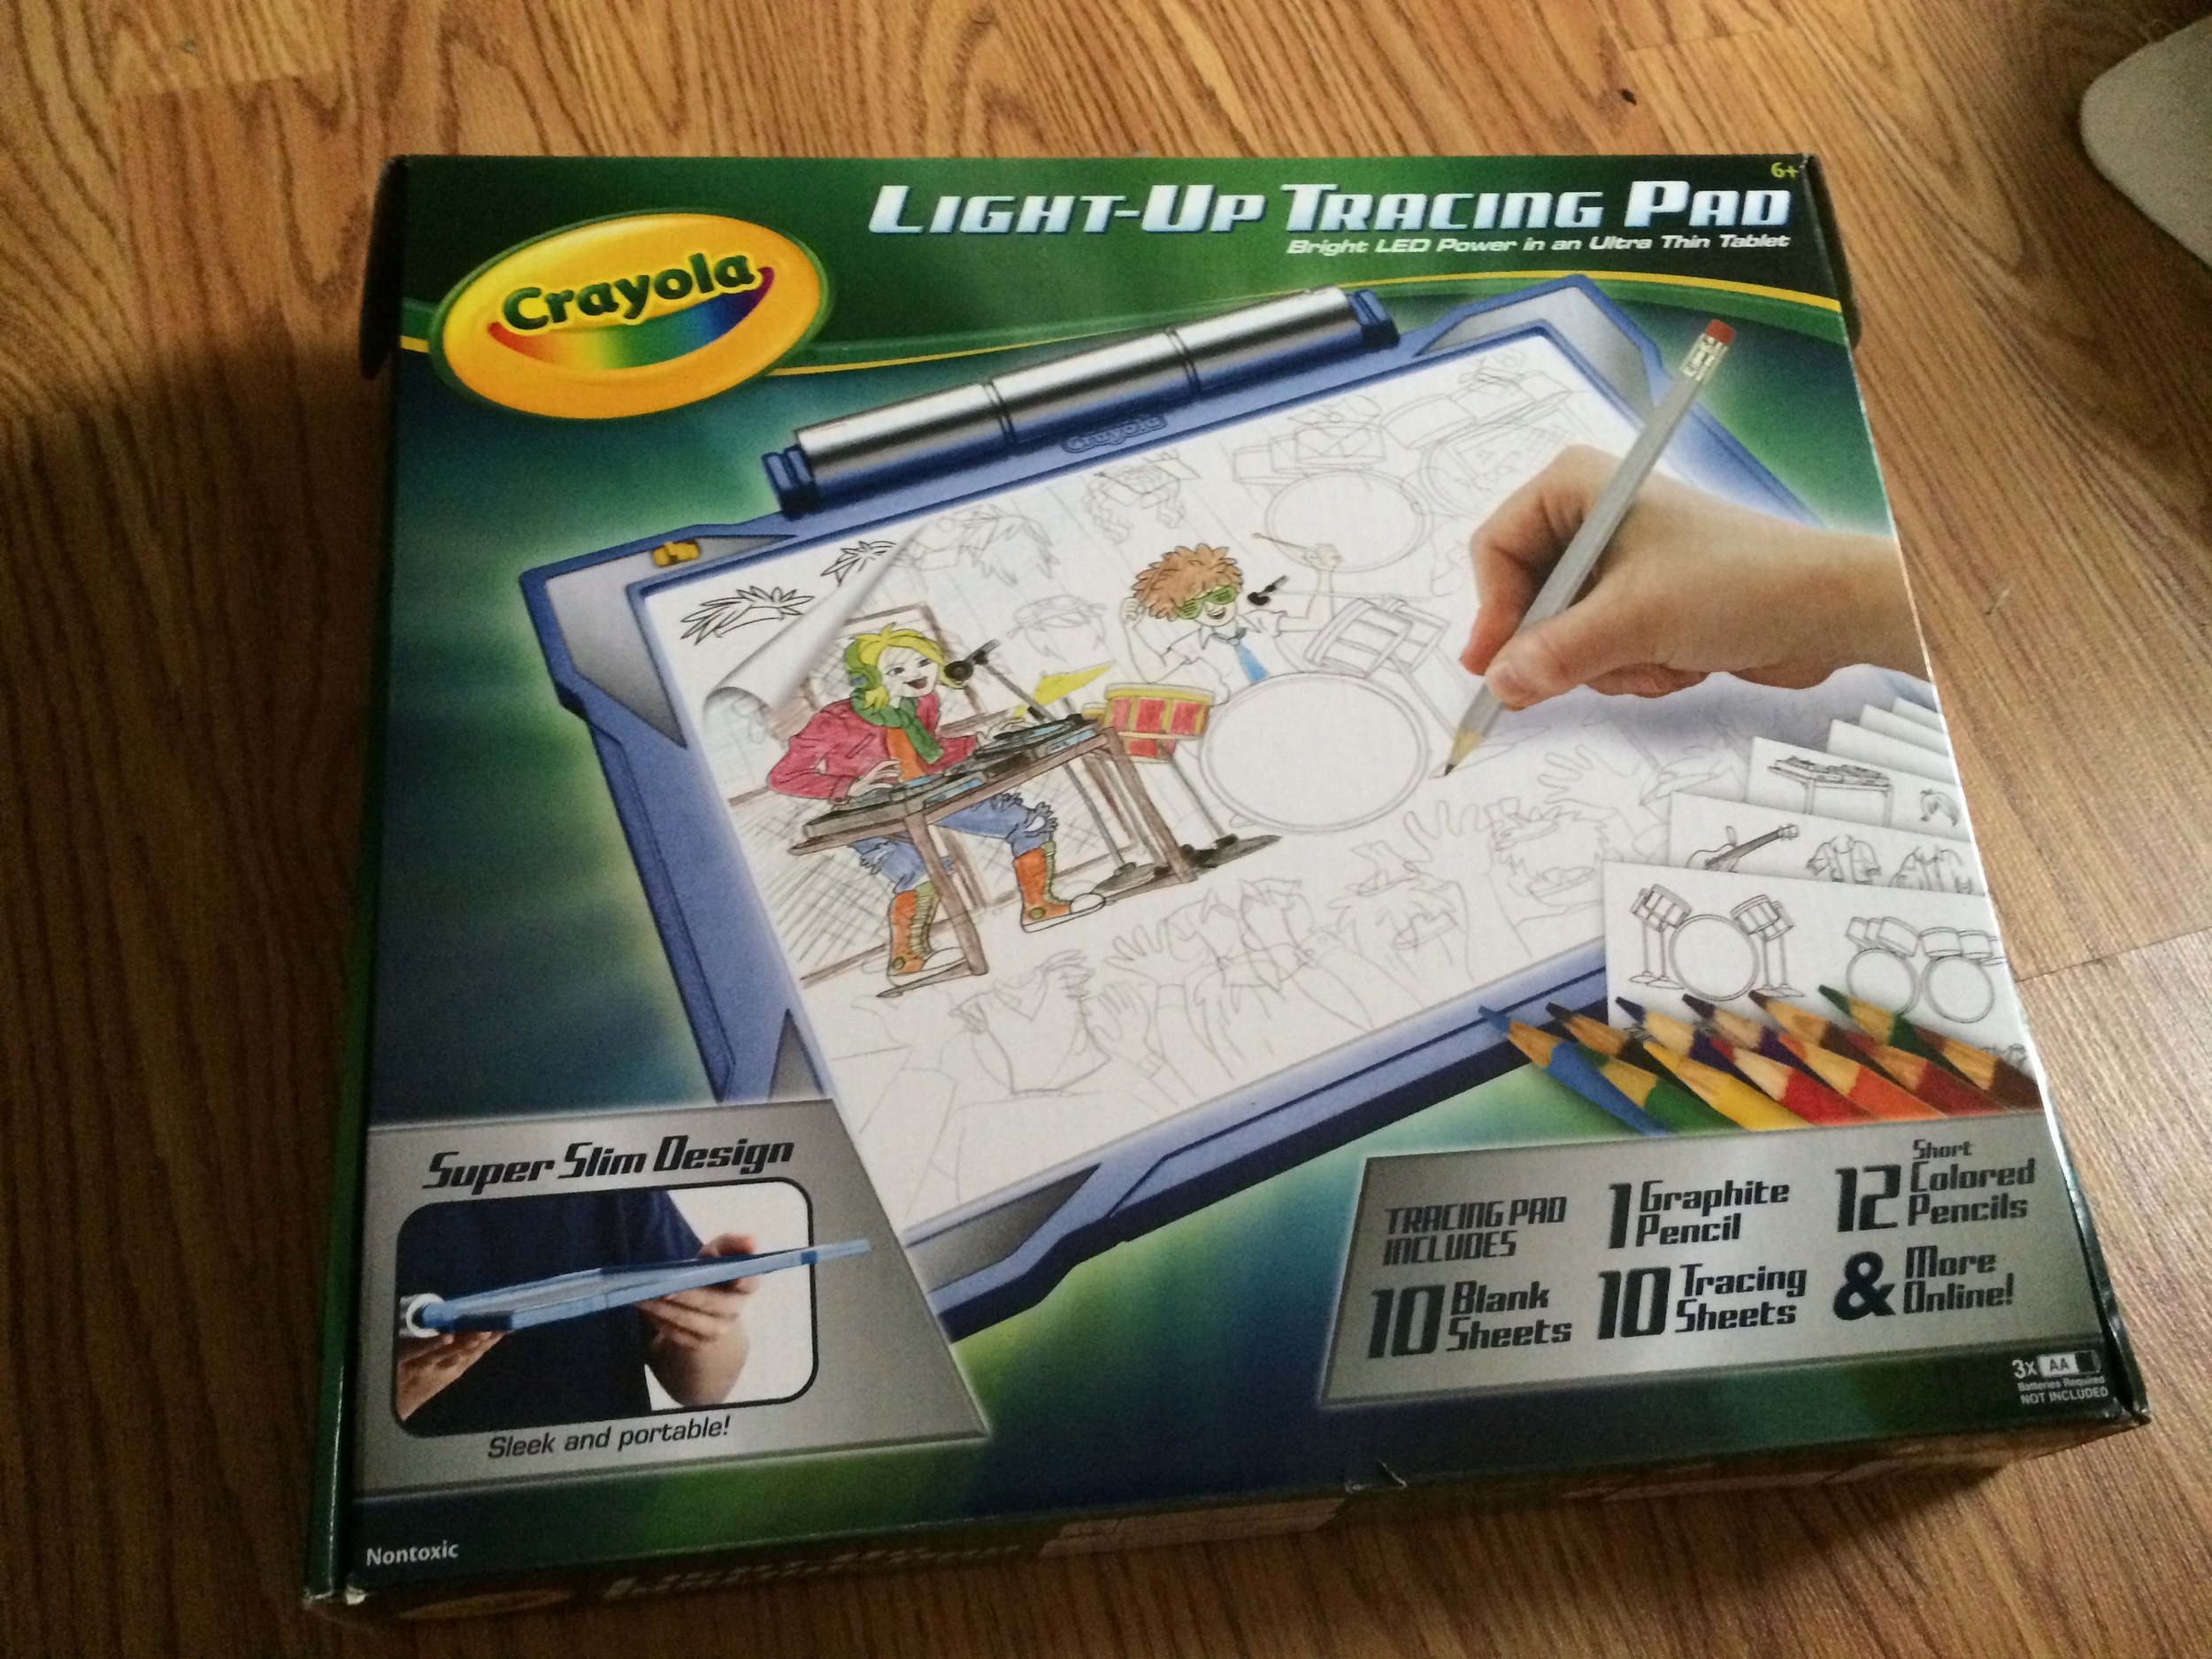 Finally upgrading from our days of taping paper to the window for tracing.  #ad With the @Crayola Light Up Tracing Pad, you can trace…